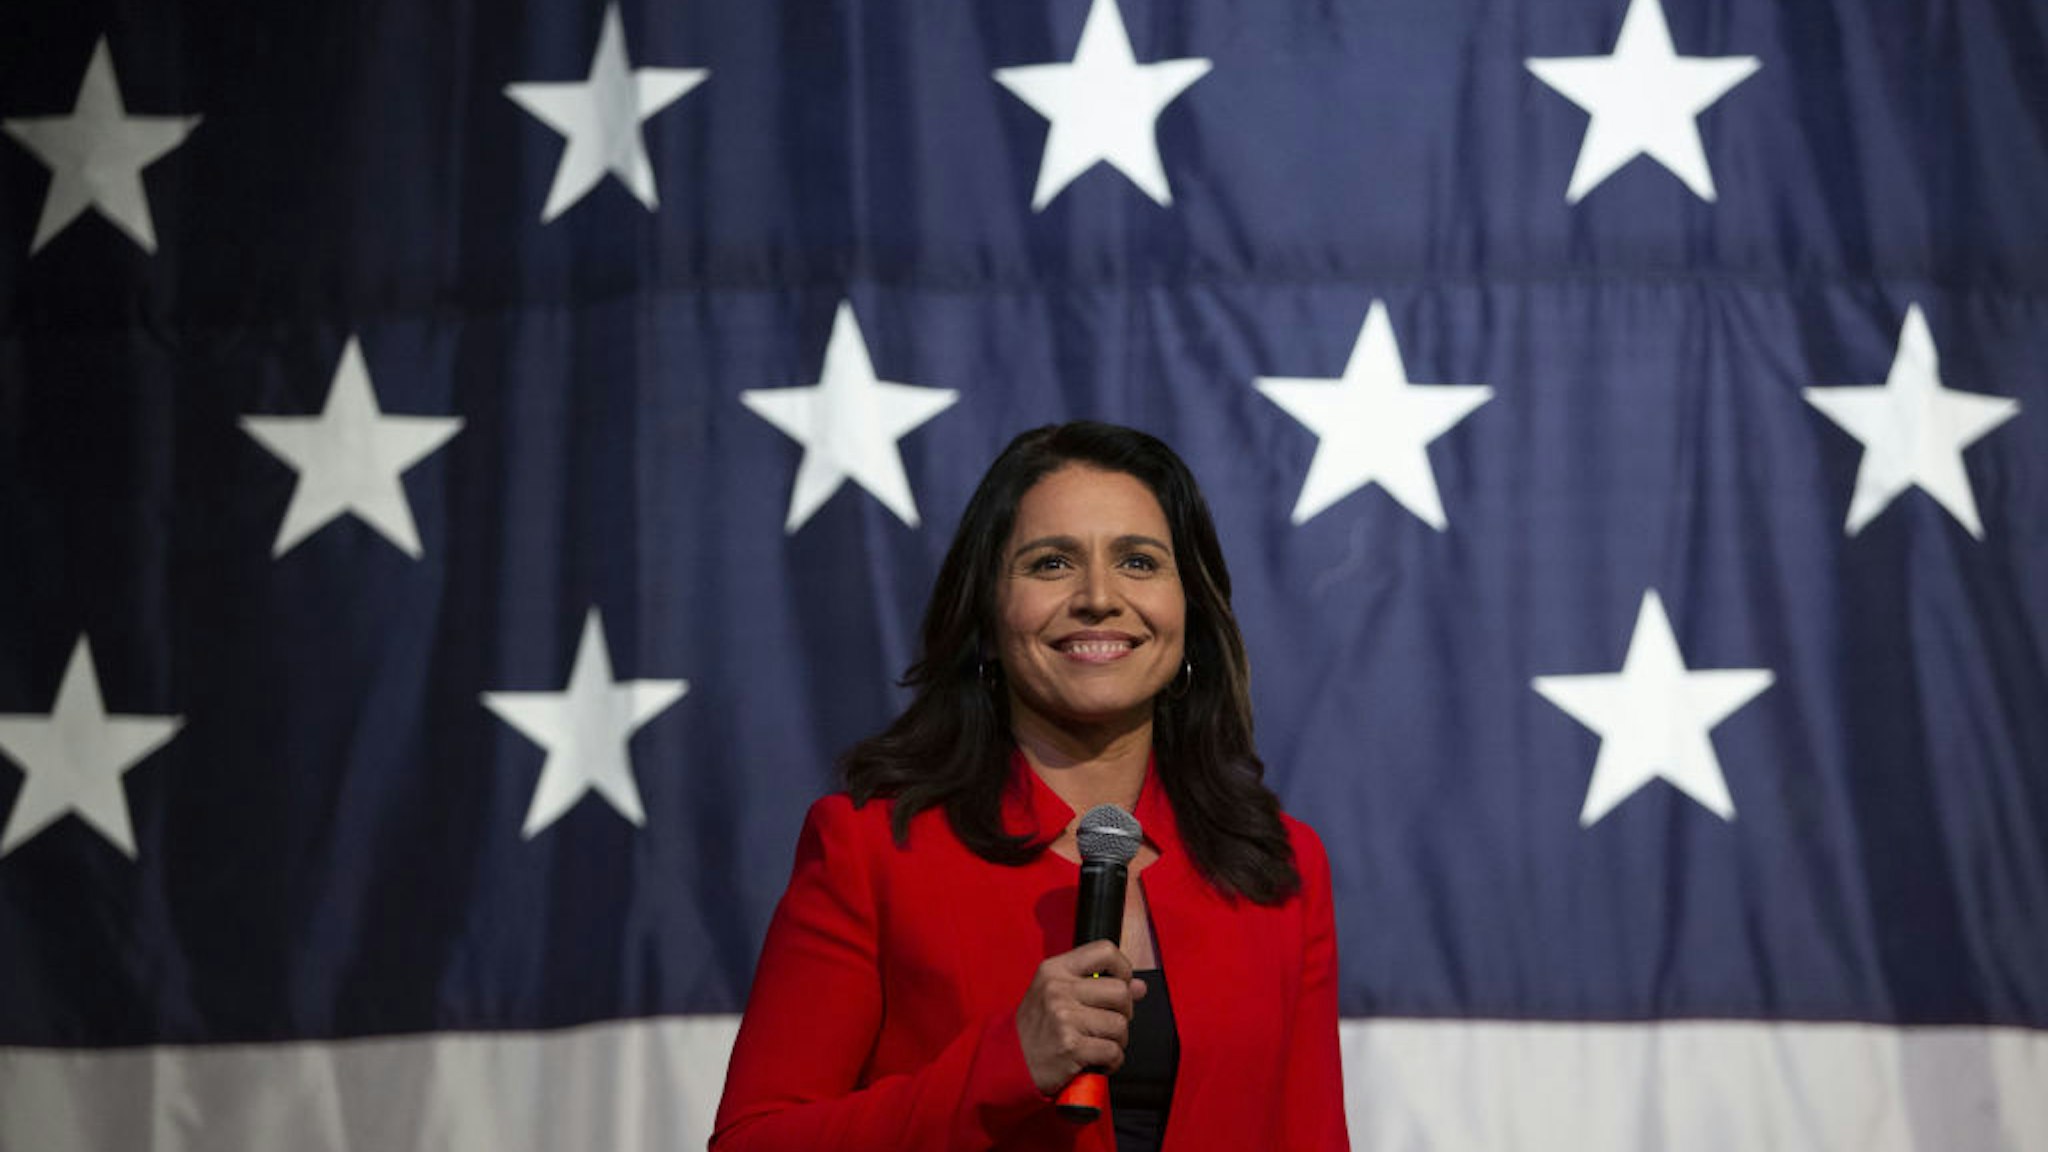 Tulsi Gabbard, a Democrat from Hawaii and 2020 presidential candidate, speaks during the Democratic Wing Ding event in Clear Lake, Iowa